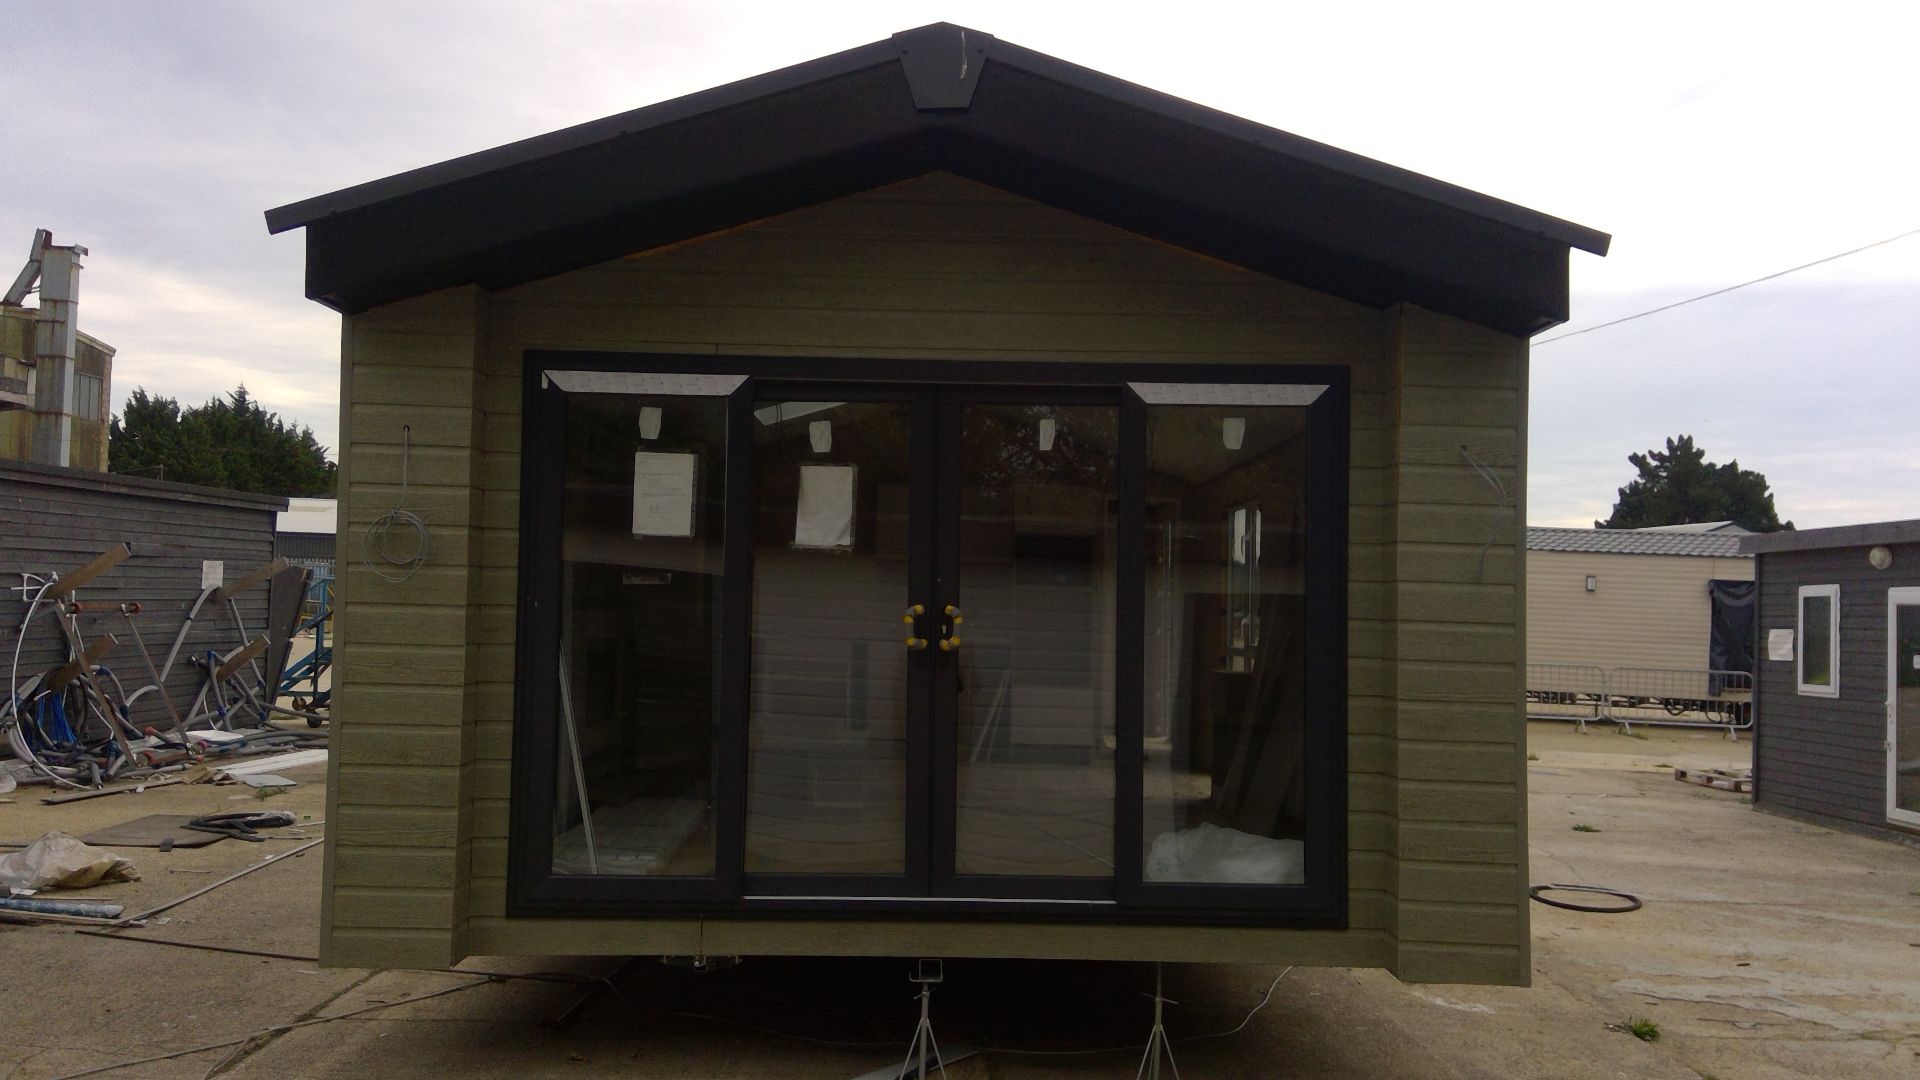 004136 Artisan 41ft x 14ft holiday home unfinished as per photos